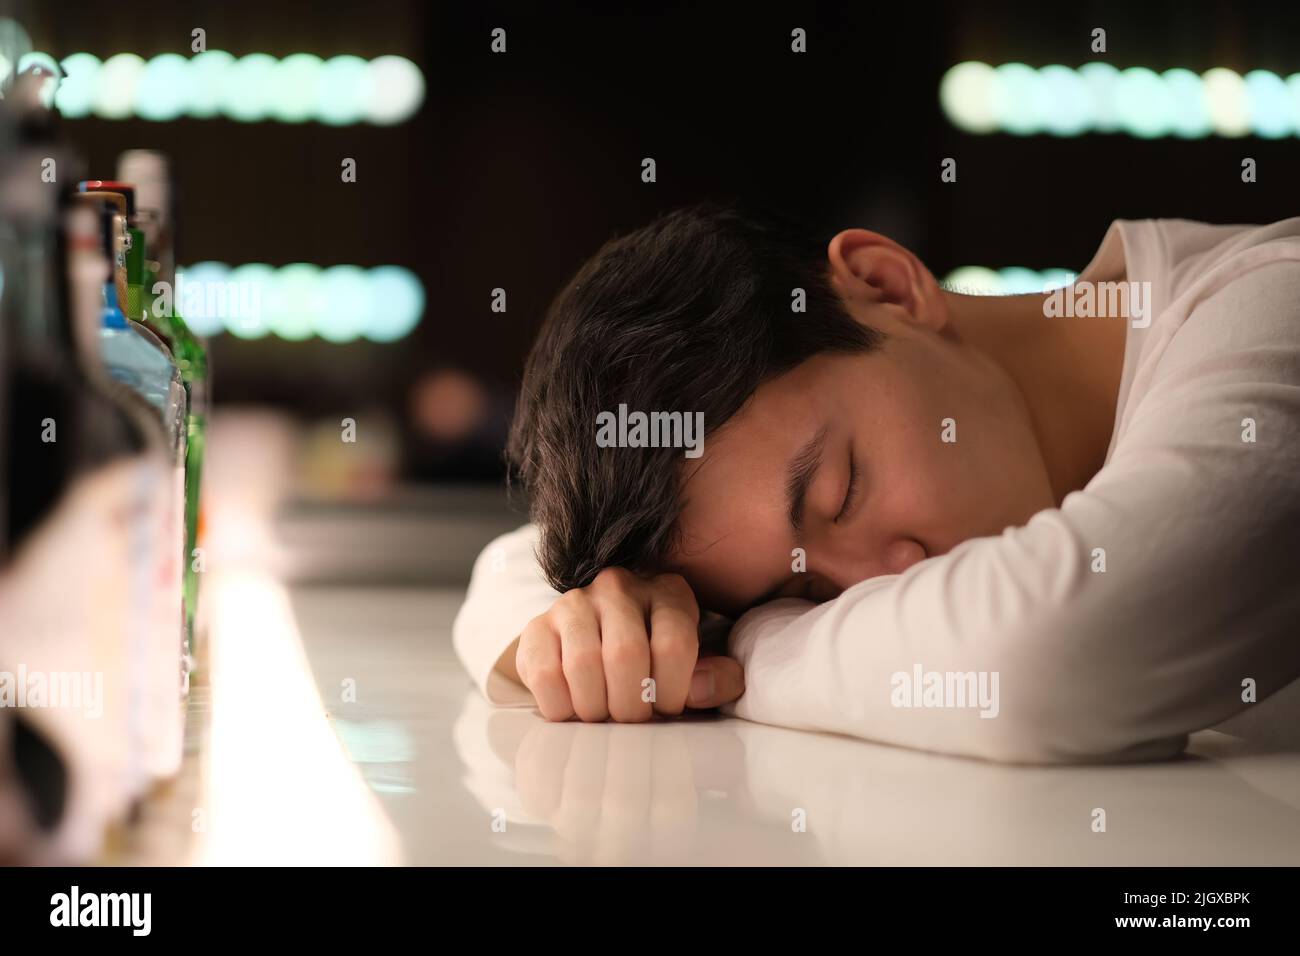 one handsome Asian young man drunk on bar counter at night Stock Photo